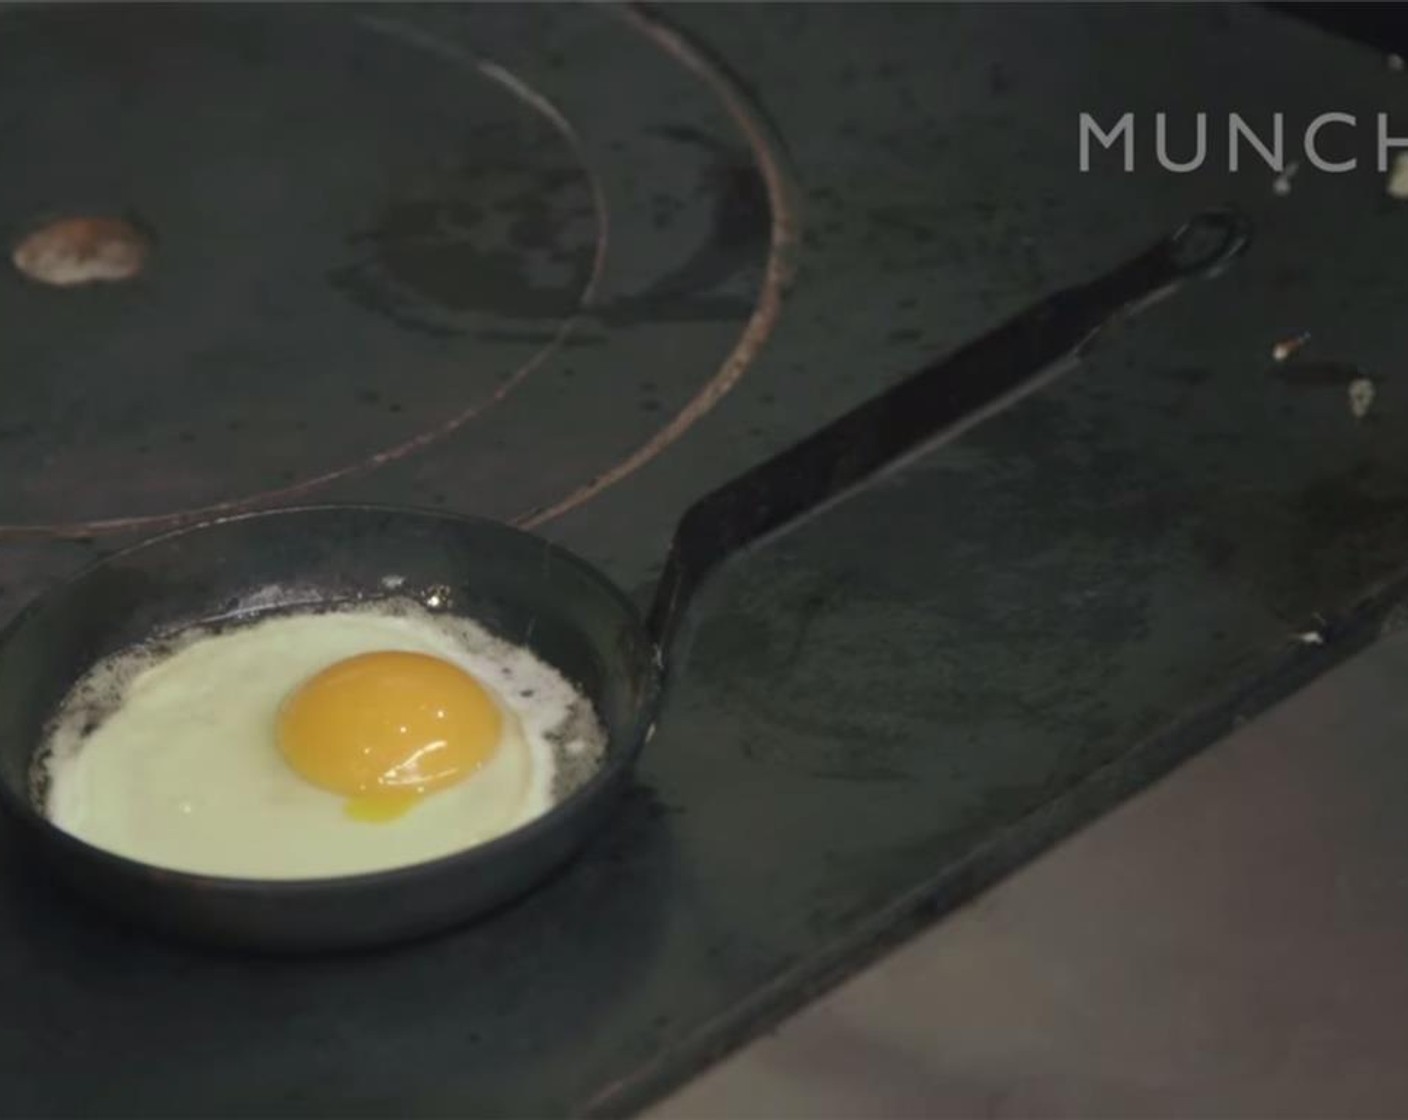 step 9 Meanwhile, heat ½ tablespoon butter in a small skillet or egg pan over medium heat. Gently crack Egg (1) into the pan, being careful not to break the yolk. Cook until white is just done and not snotty. Sprinkle with salt and place on top of the sandwich.